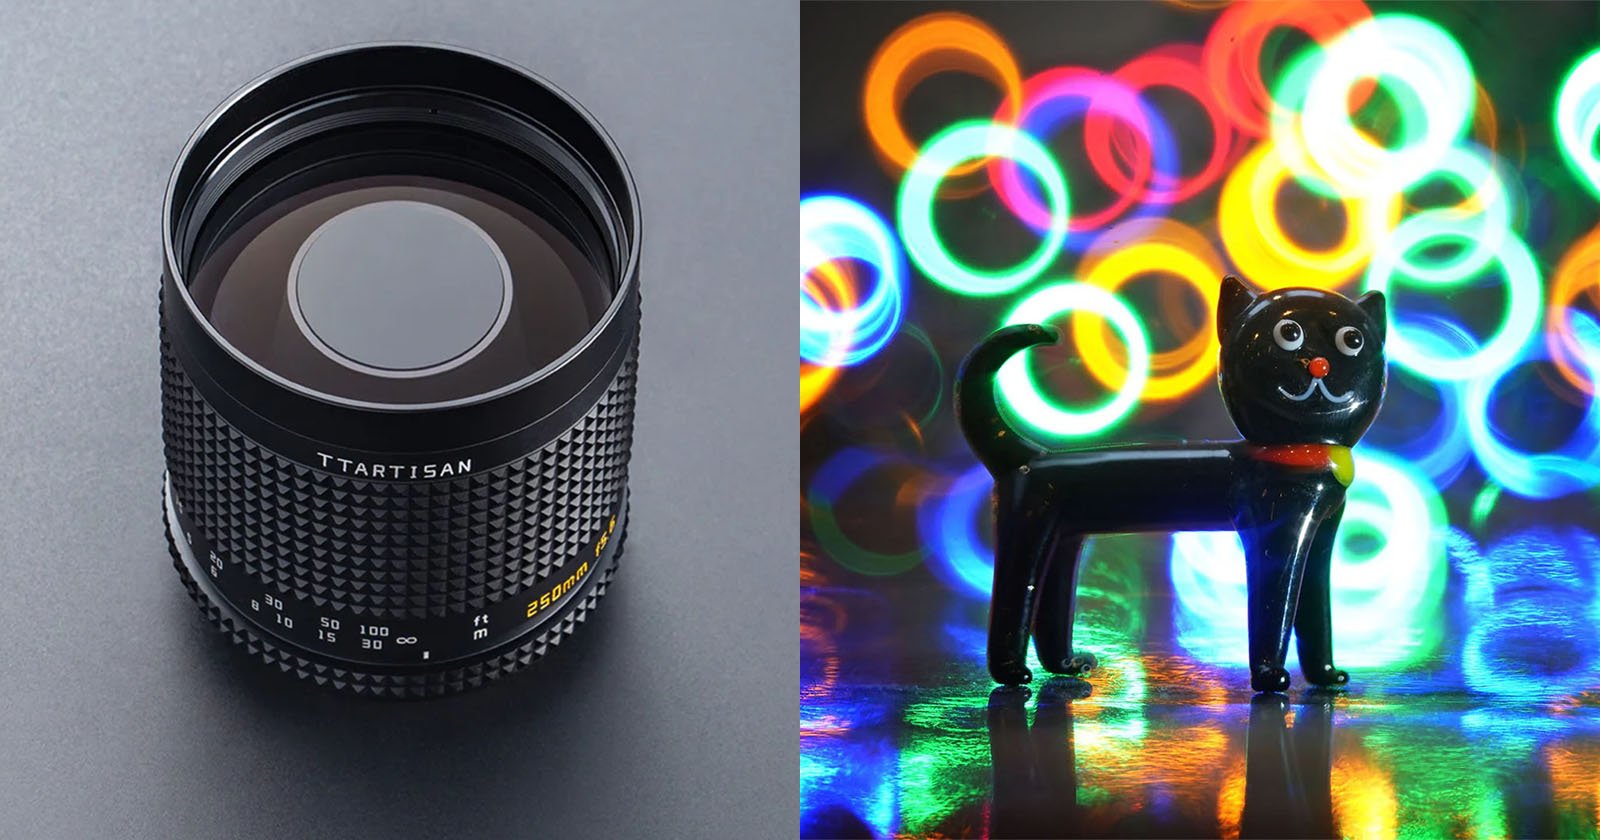 The image is divided into two sides. The left side shows a close-up of a TTArtisan camera lens on a gray background. The right side shows a toy black cat with colorful bokeh light circles in the background. The cat has a red collar and white eyes.